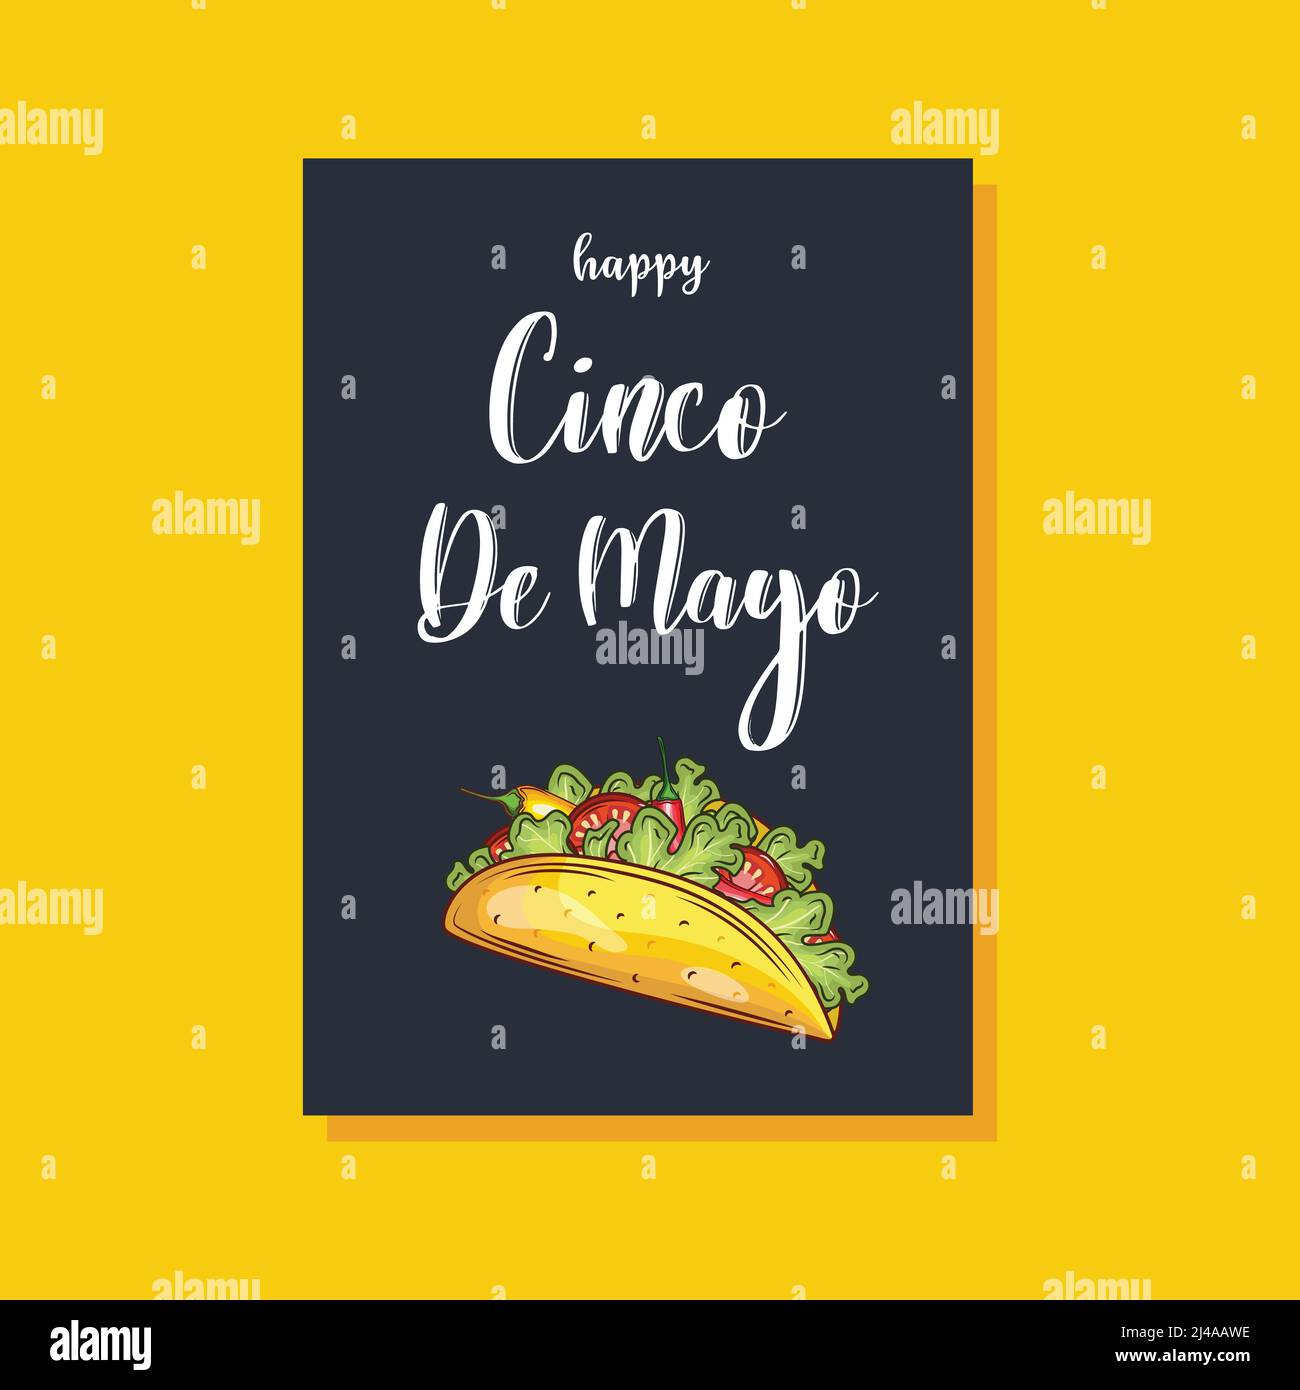 Cinco de mayo.May 5, federal holiday in Mexico. Poster with grunge texture and tacos. Cartoon style. Vector banner. Stock Vector